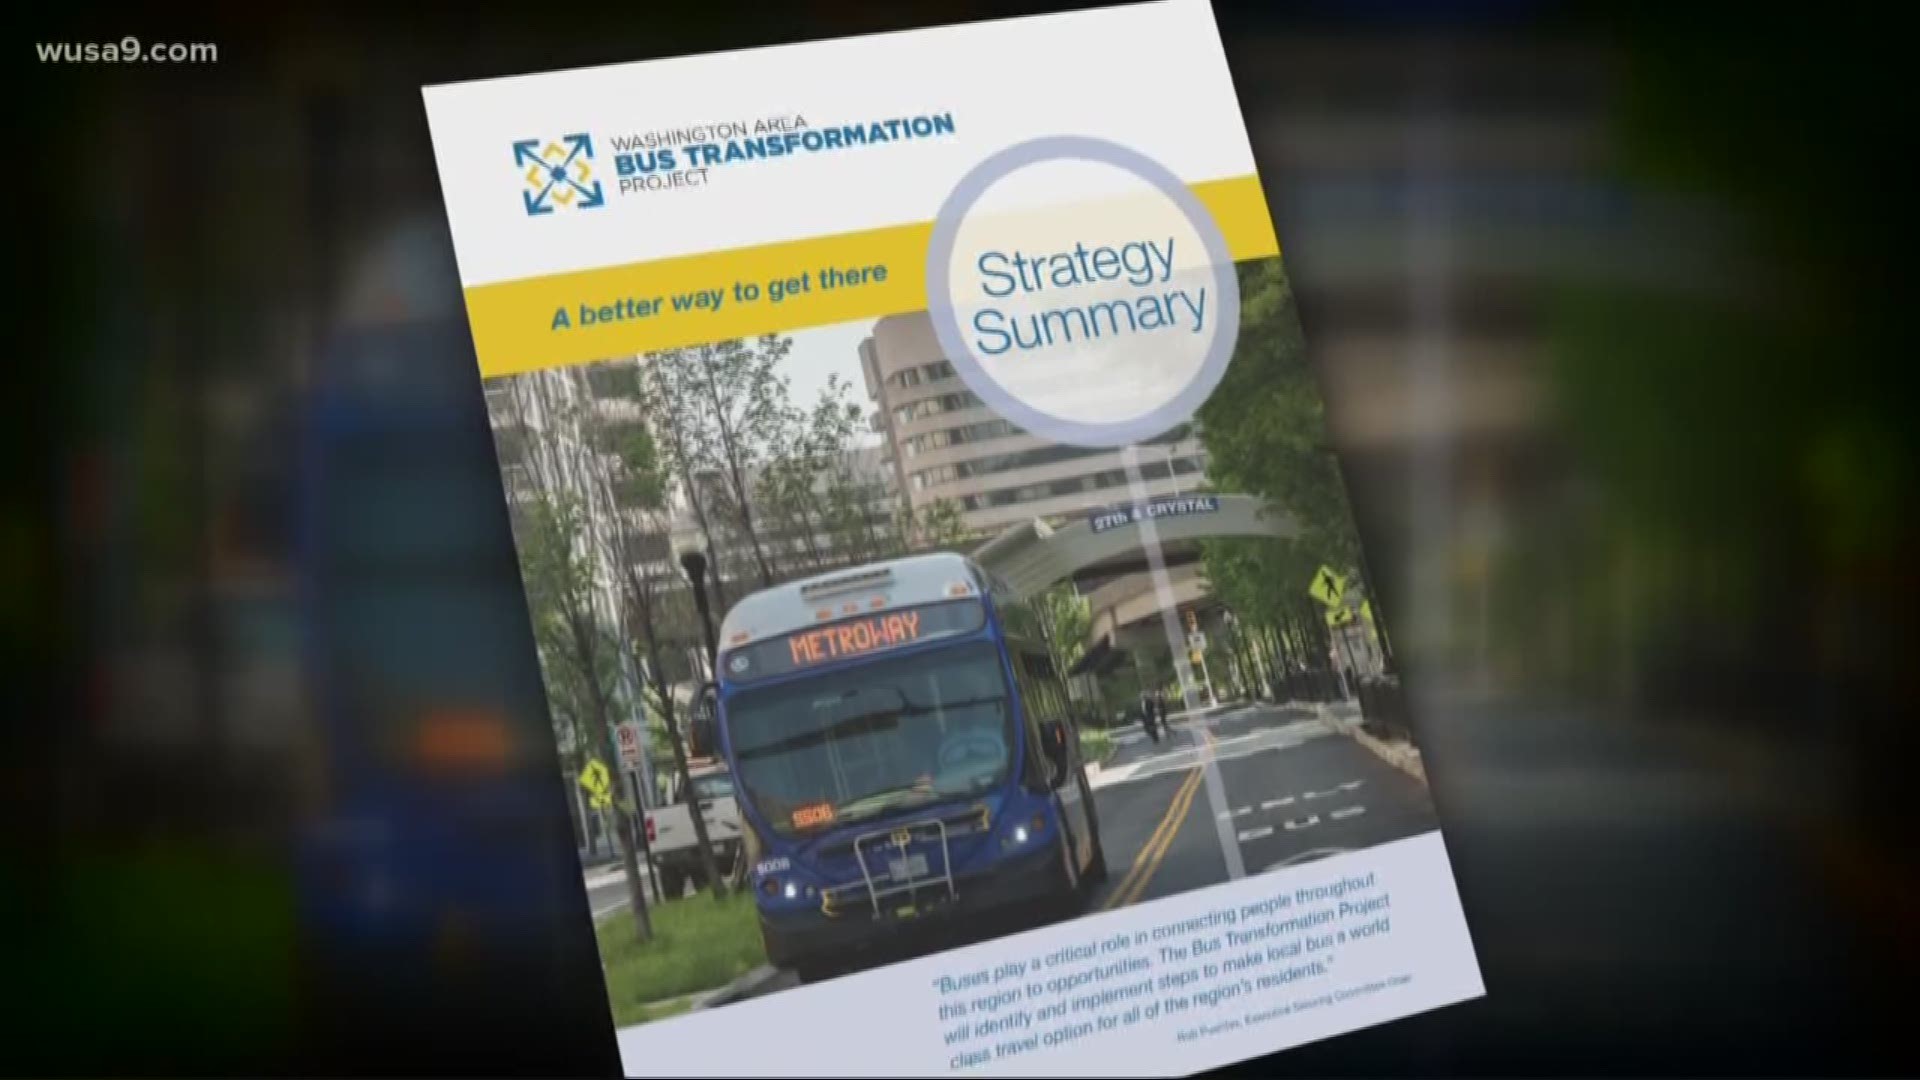 Metro is pledging to have better routes, to speed up commutes and to cut down on congestion in just 0 years. The goal is to let everyone have their voice heard, because big bus changes could be coming.